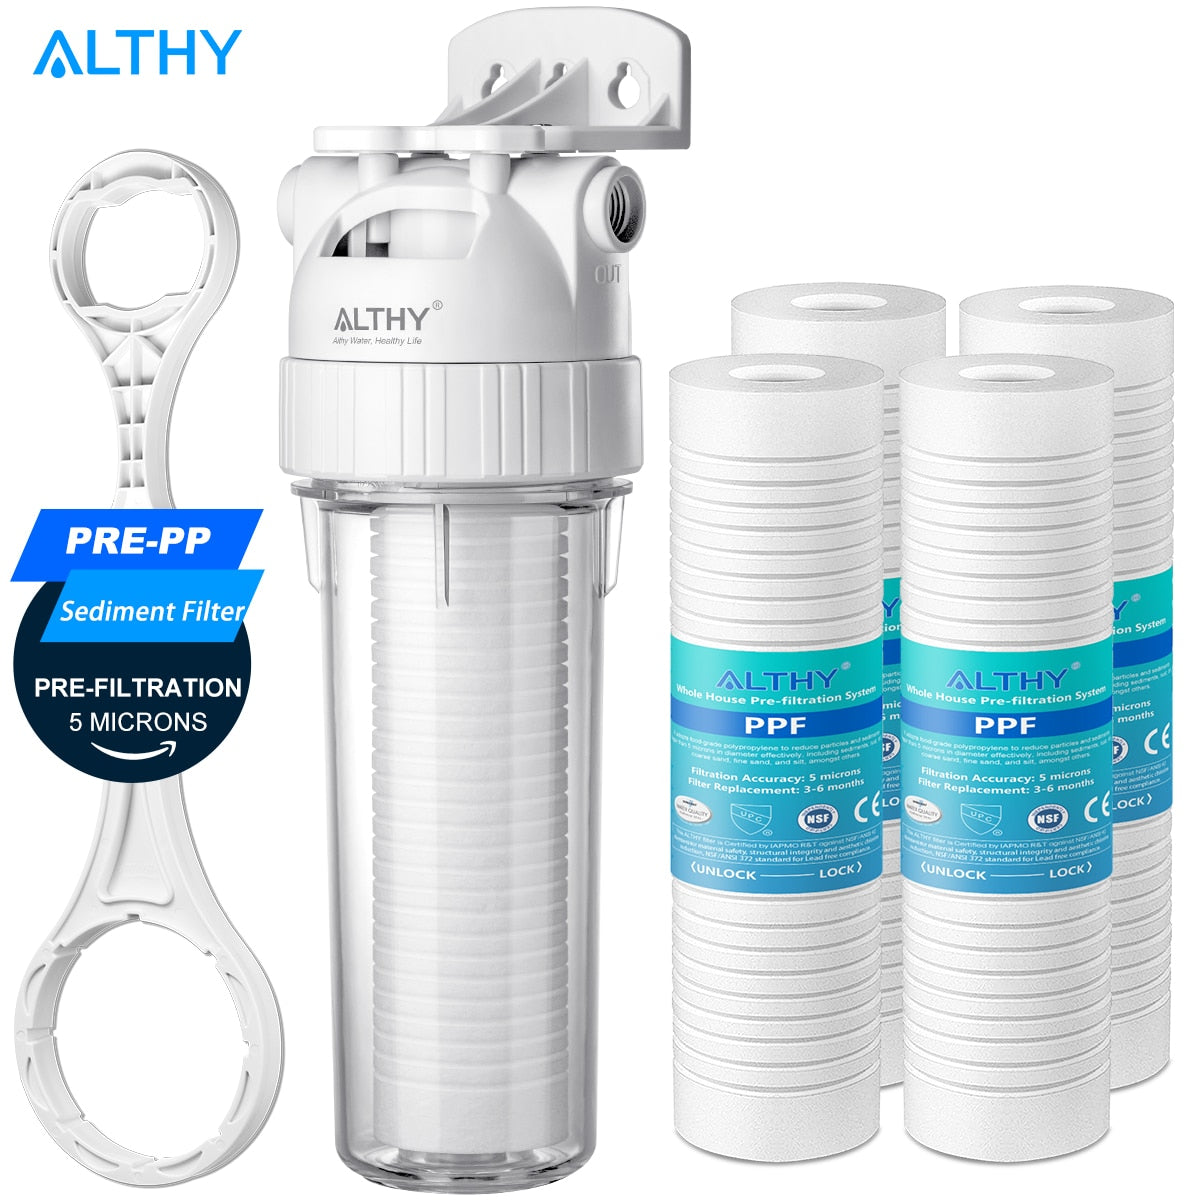 ALTHY 5 Micron Whole House Sediment Water Filter System Prefilter Purifier, 10 Inch PPFcotton Pre filter  Hardware > Plumbing > Water Dispensing & Filtration 212.99 EZYSELLA SHOP